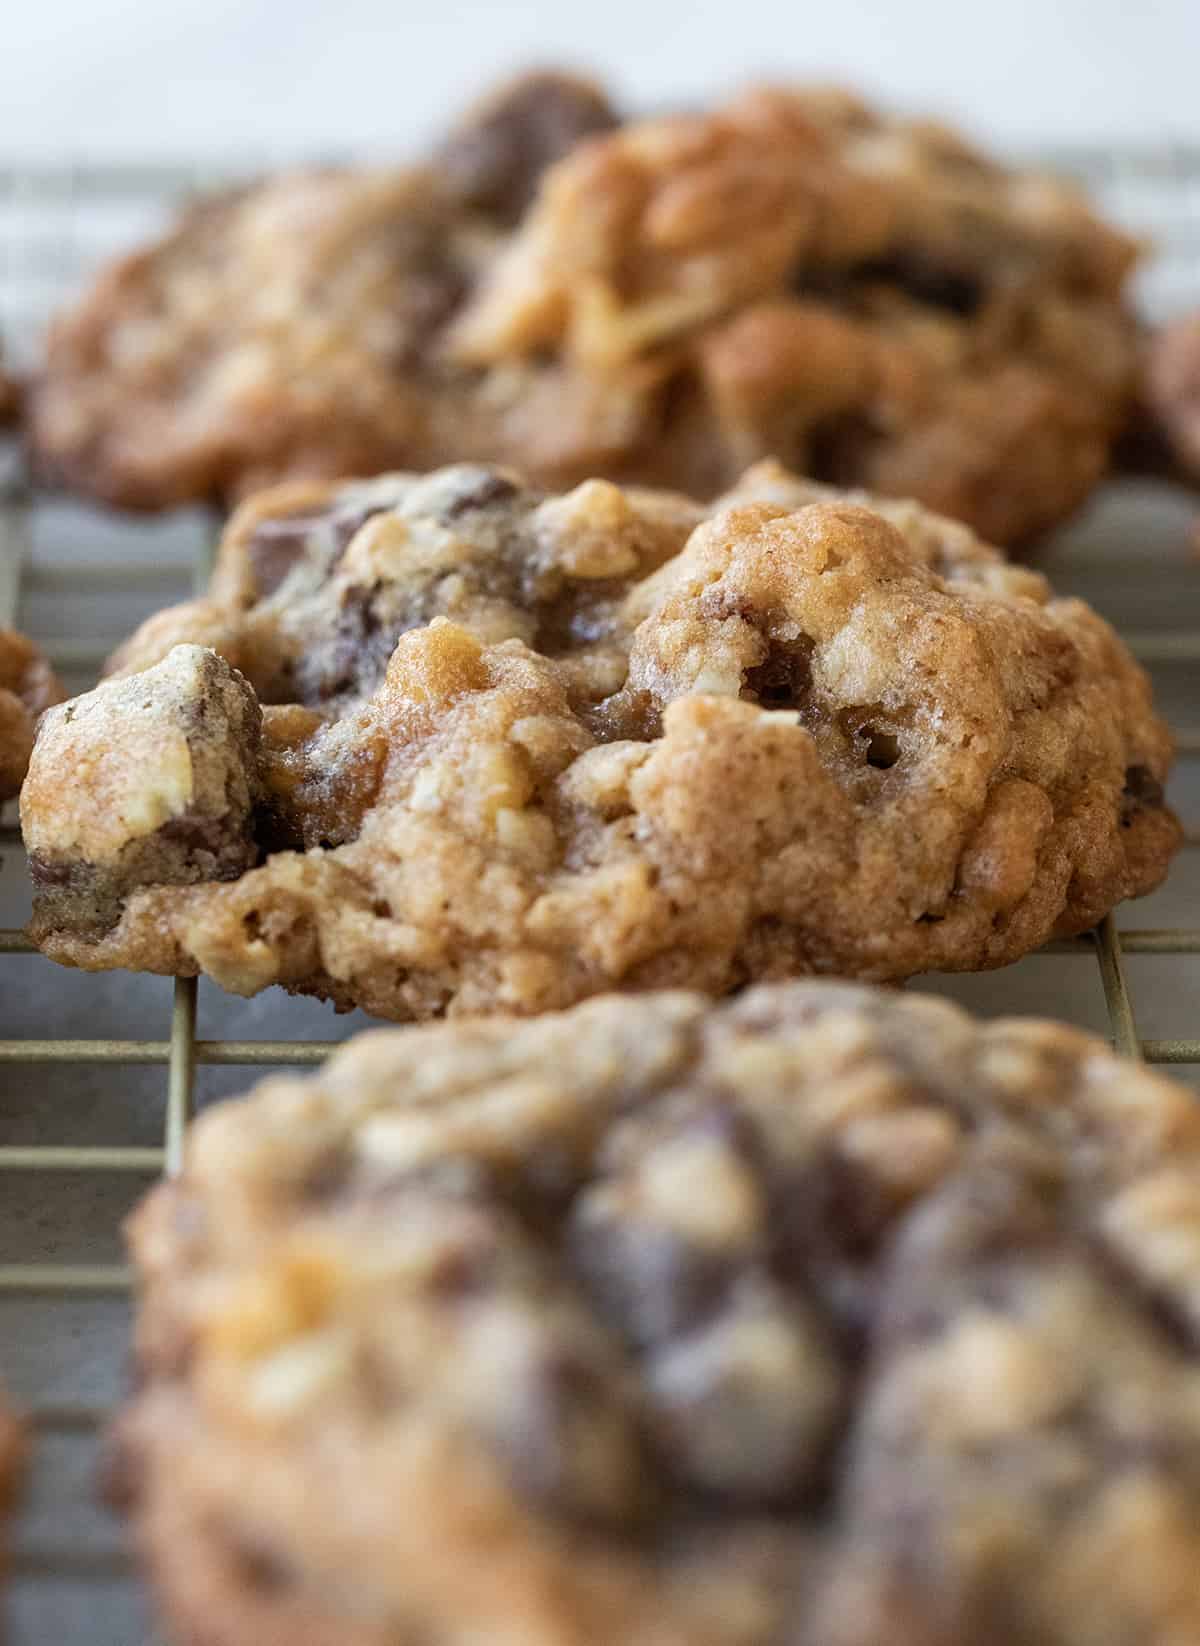 Chewy chocolate chip cookies with walnuts on a cooling rack.